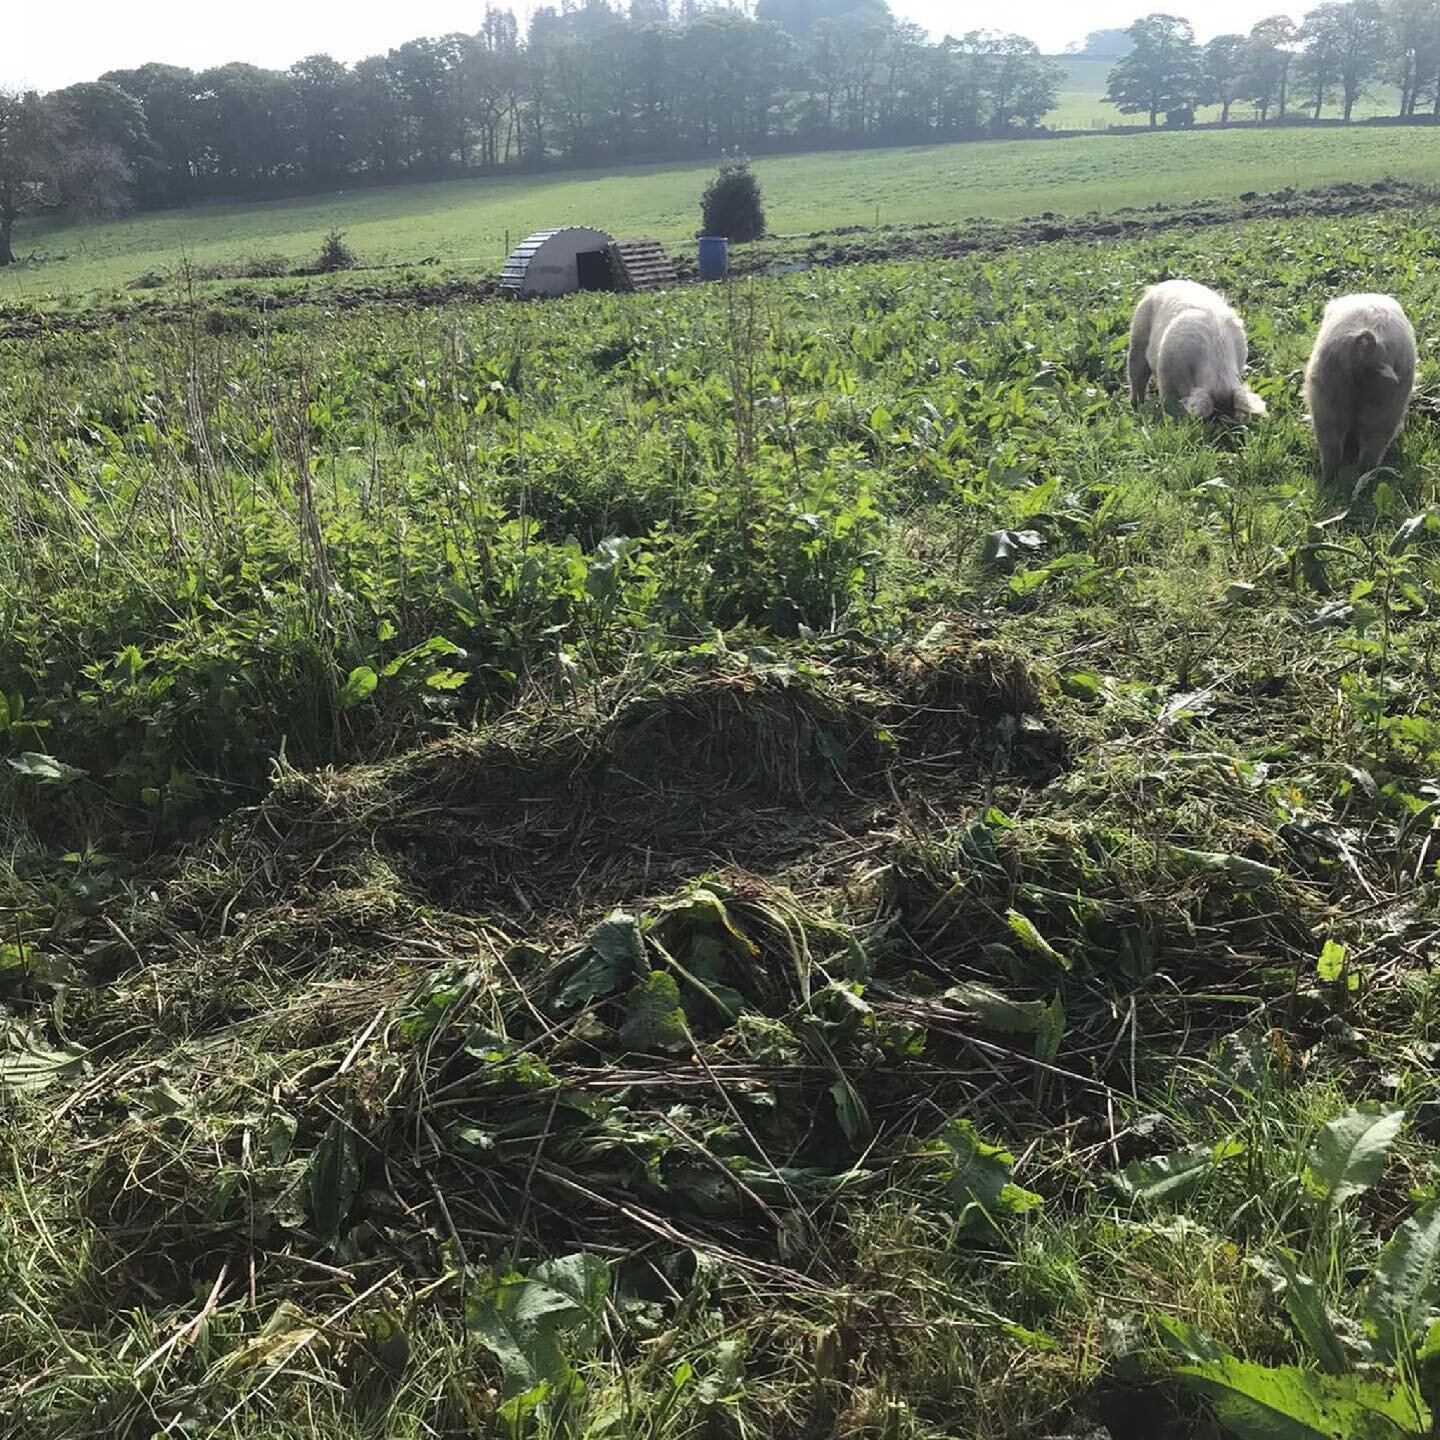 It turns out that when pigs are left to their own devices with sufficient space and foliage, they resort to inherent and natural behaviour, such as this, nest building! We came across this large pig nest made by the girls by moving grass and dock lea